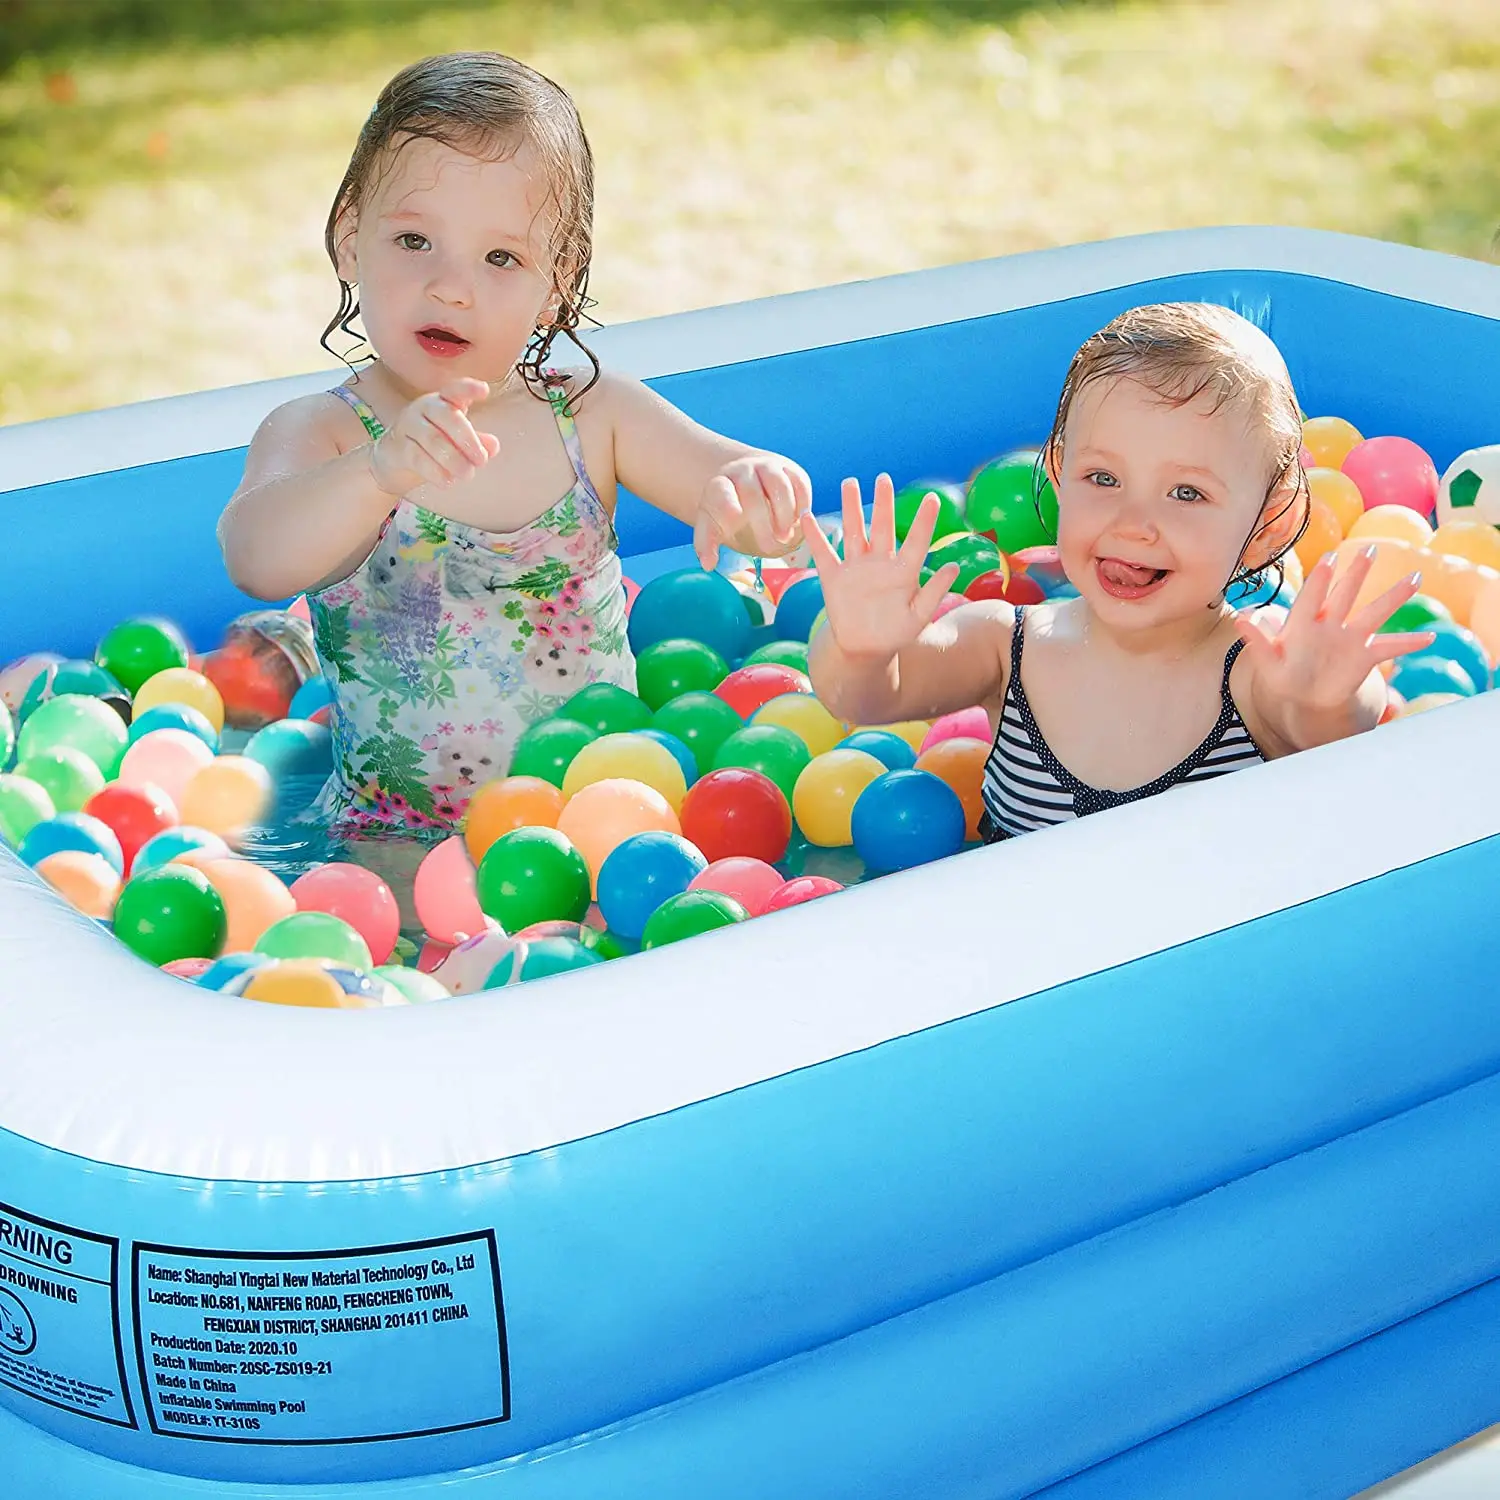 

262x175x60cmOutdoor Inflatable Swimming Pool Full-Sized Above Ground Kiddle Family Lounge Pool for Adult Kids Toddlers Blue